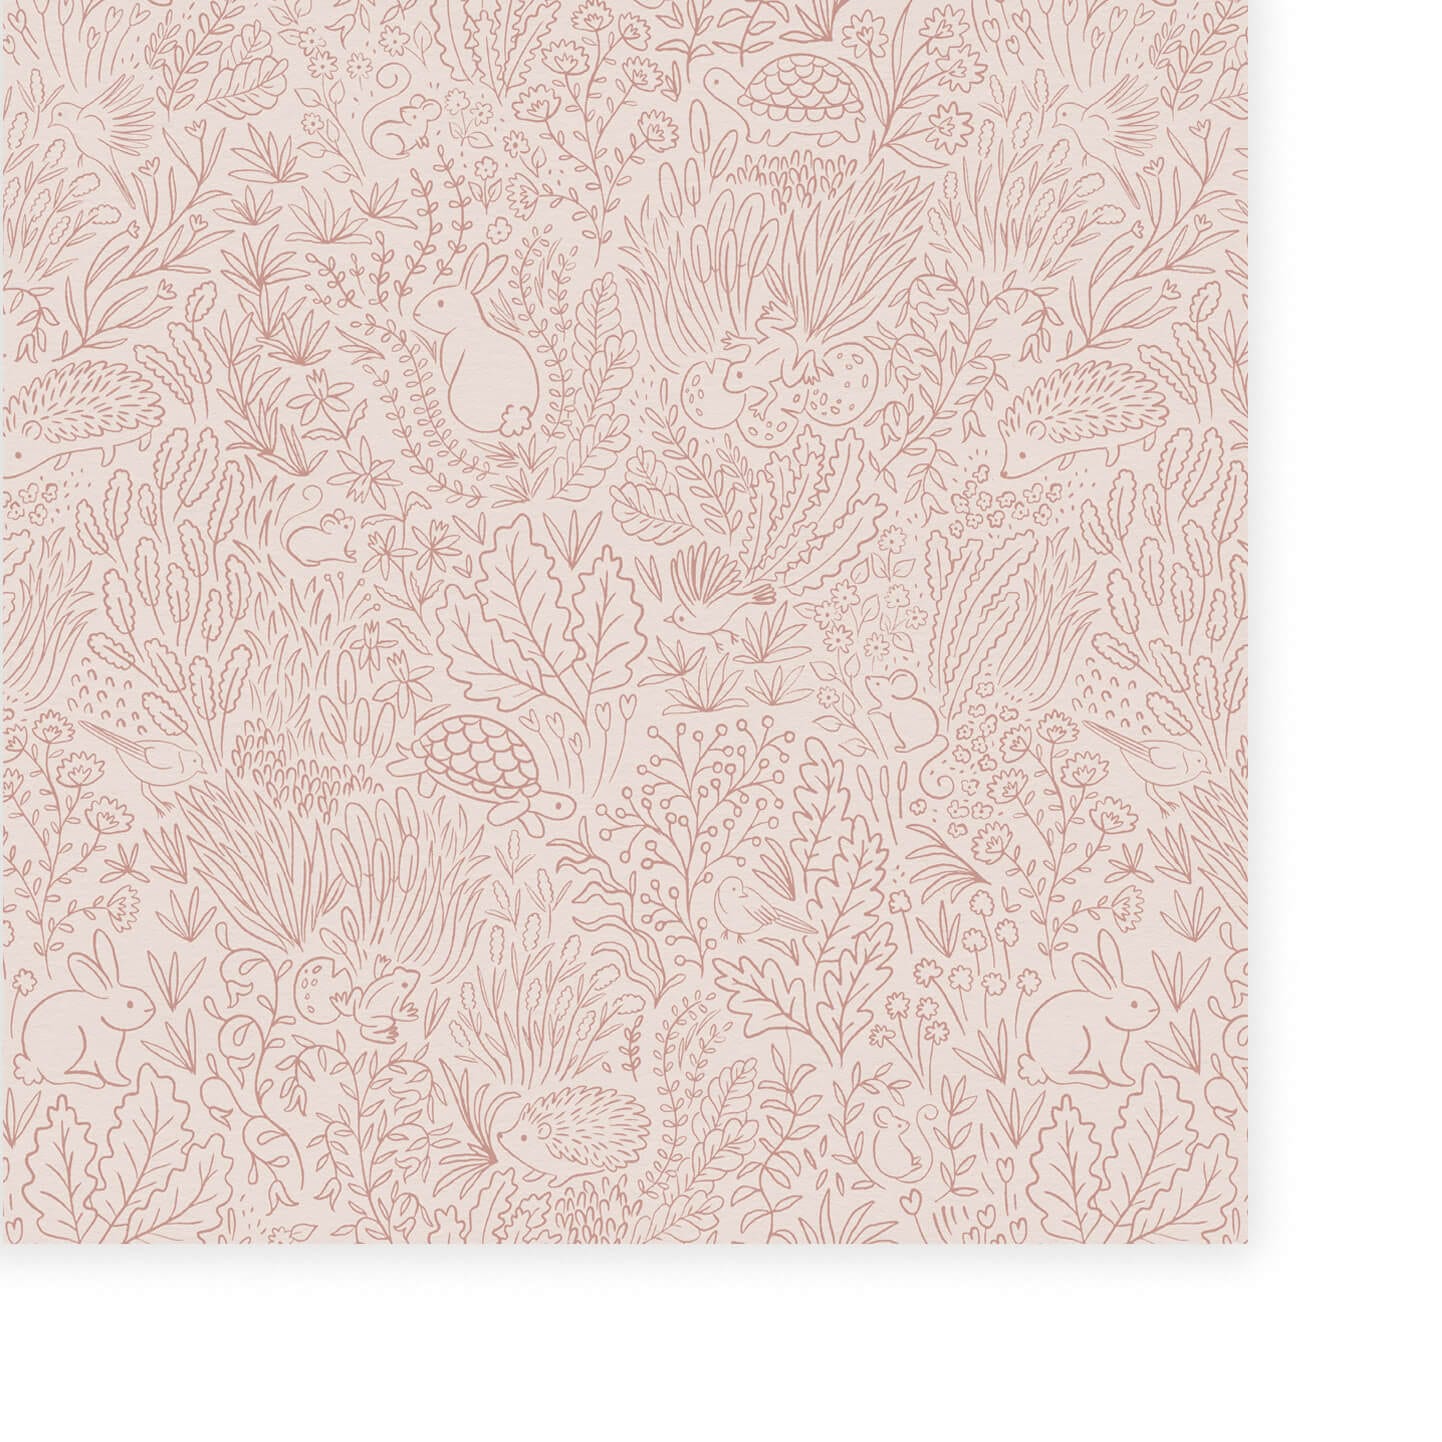 Wallpaper of pink line work animals and florals such as rabbits, hedgehogs, frogs, tortoise, mice and birds.